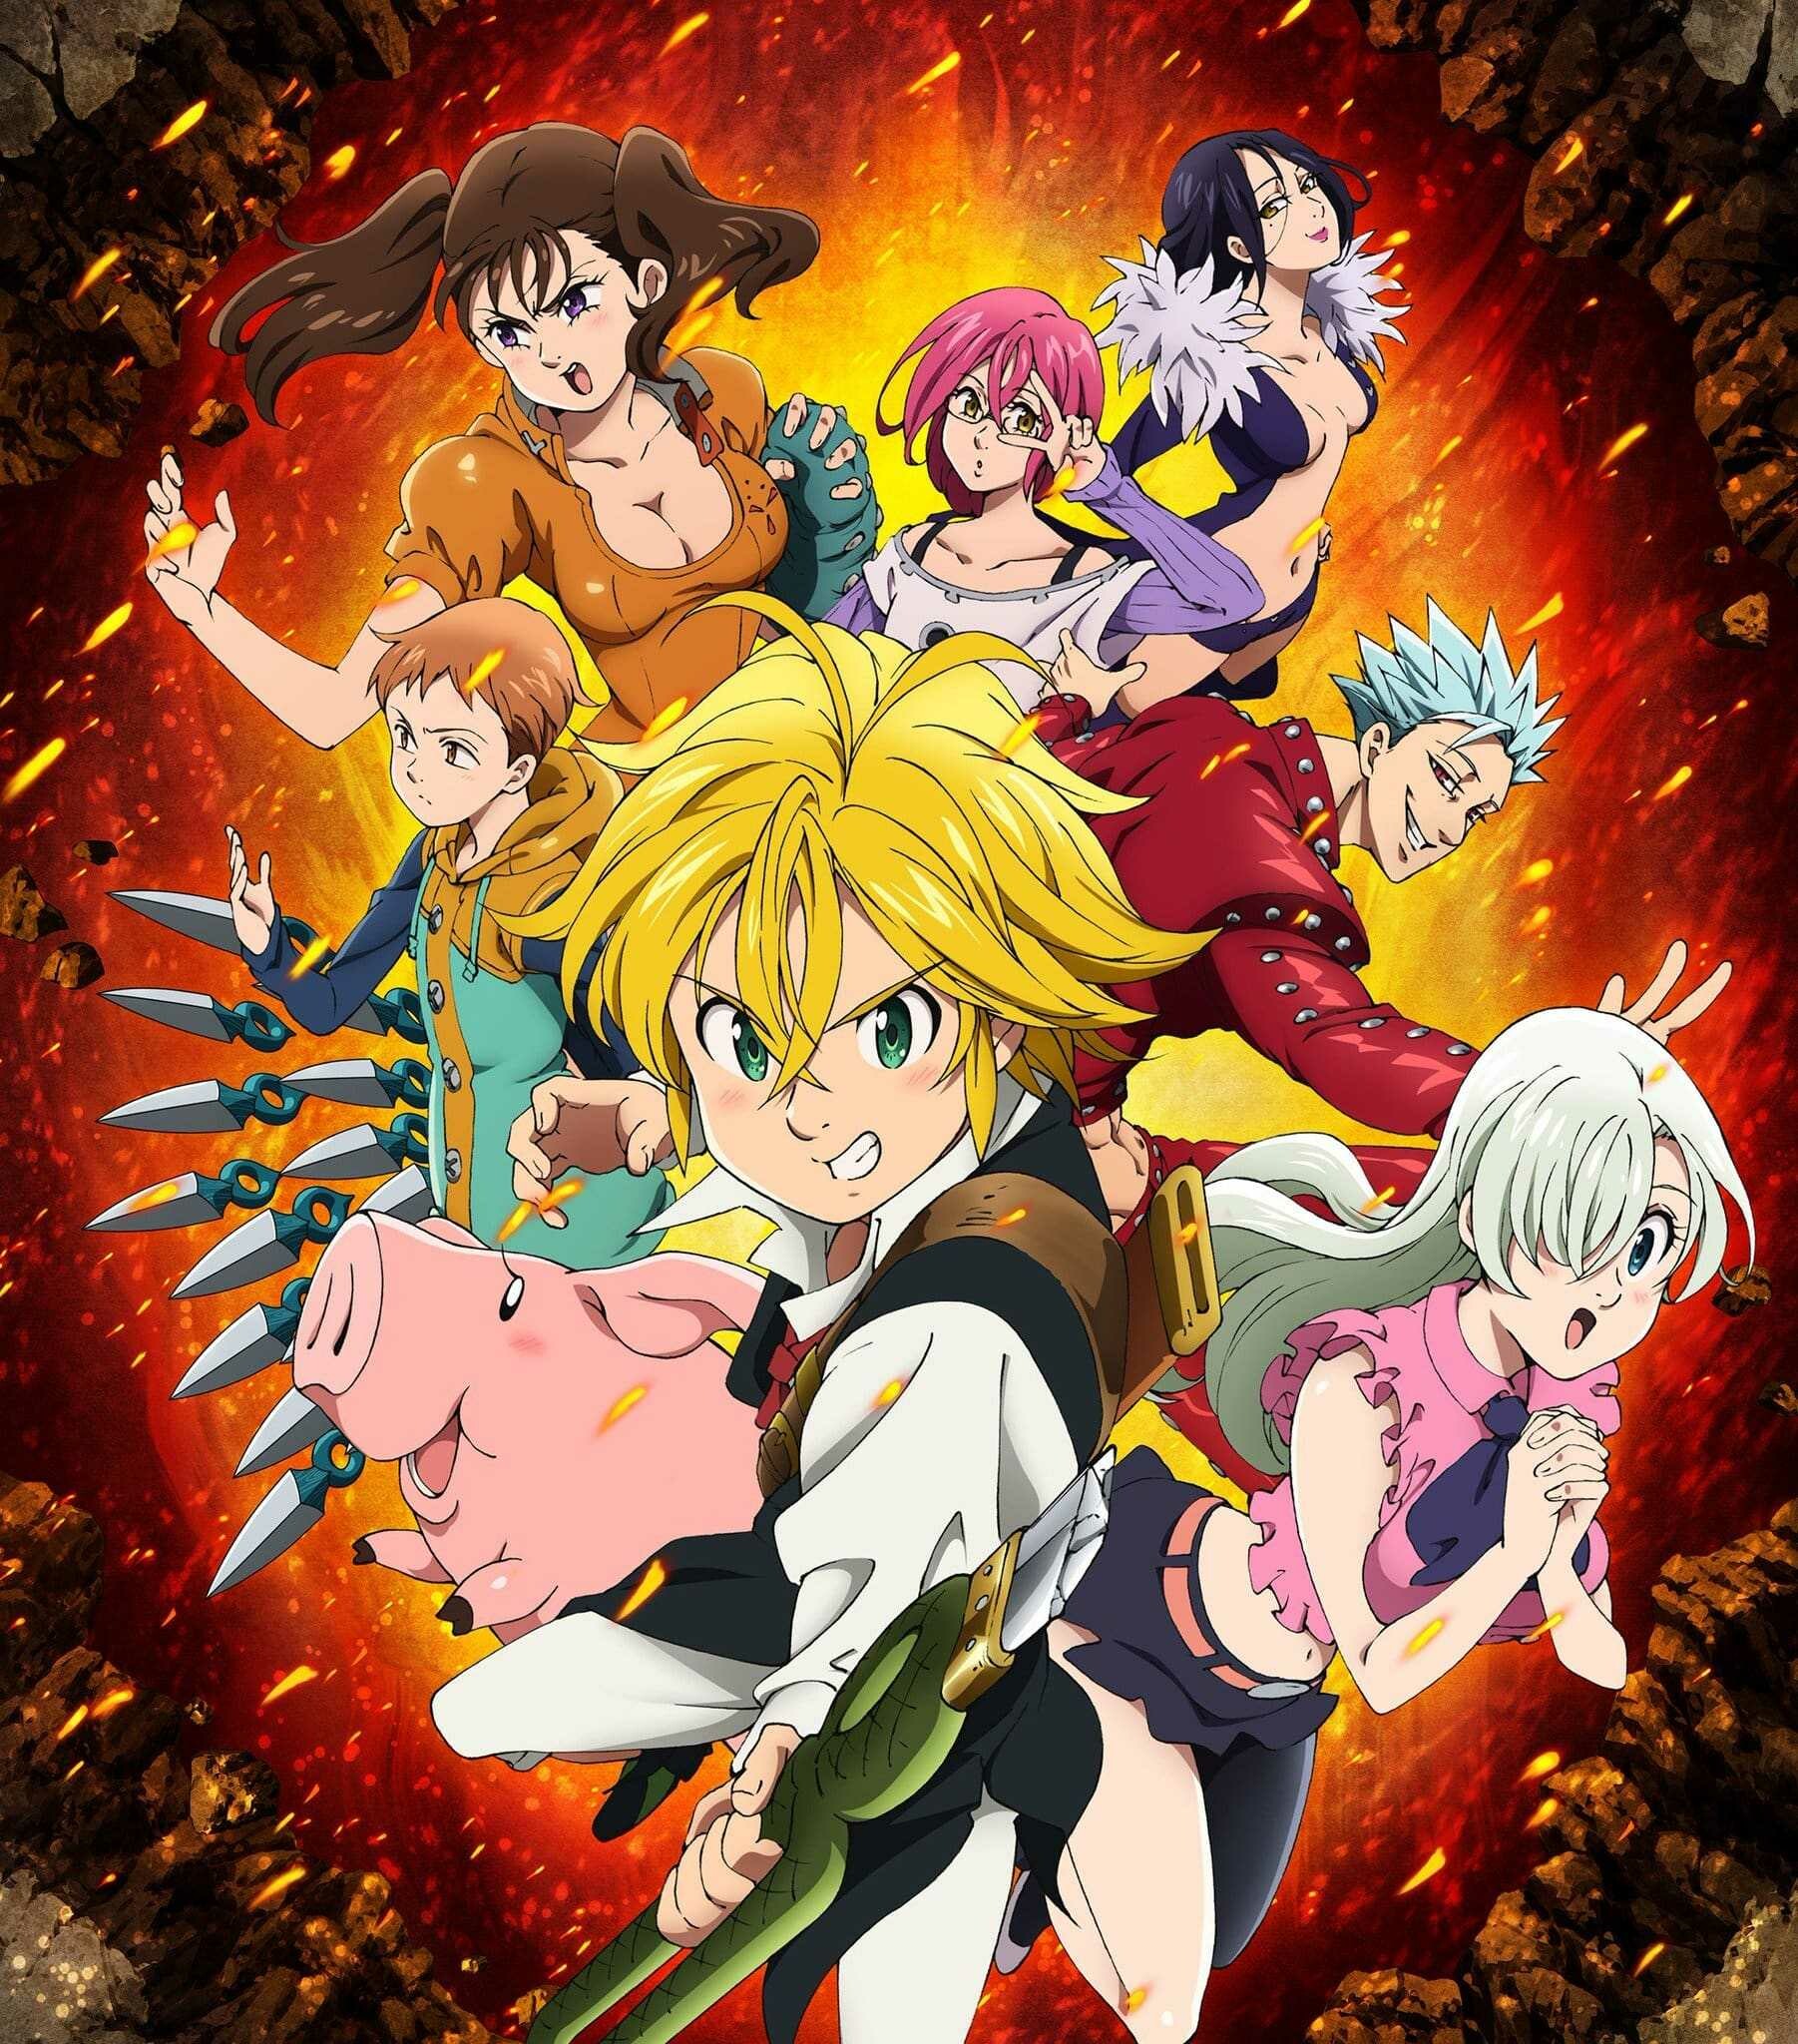 The Seven Deadly Sins: The second opening theme is "Seven Deadly Sins" performed by Man with a Mission. 1810x2050 HD Wallpaper.